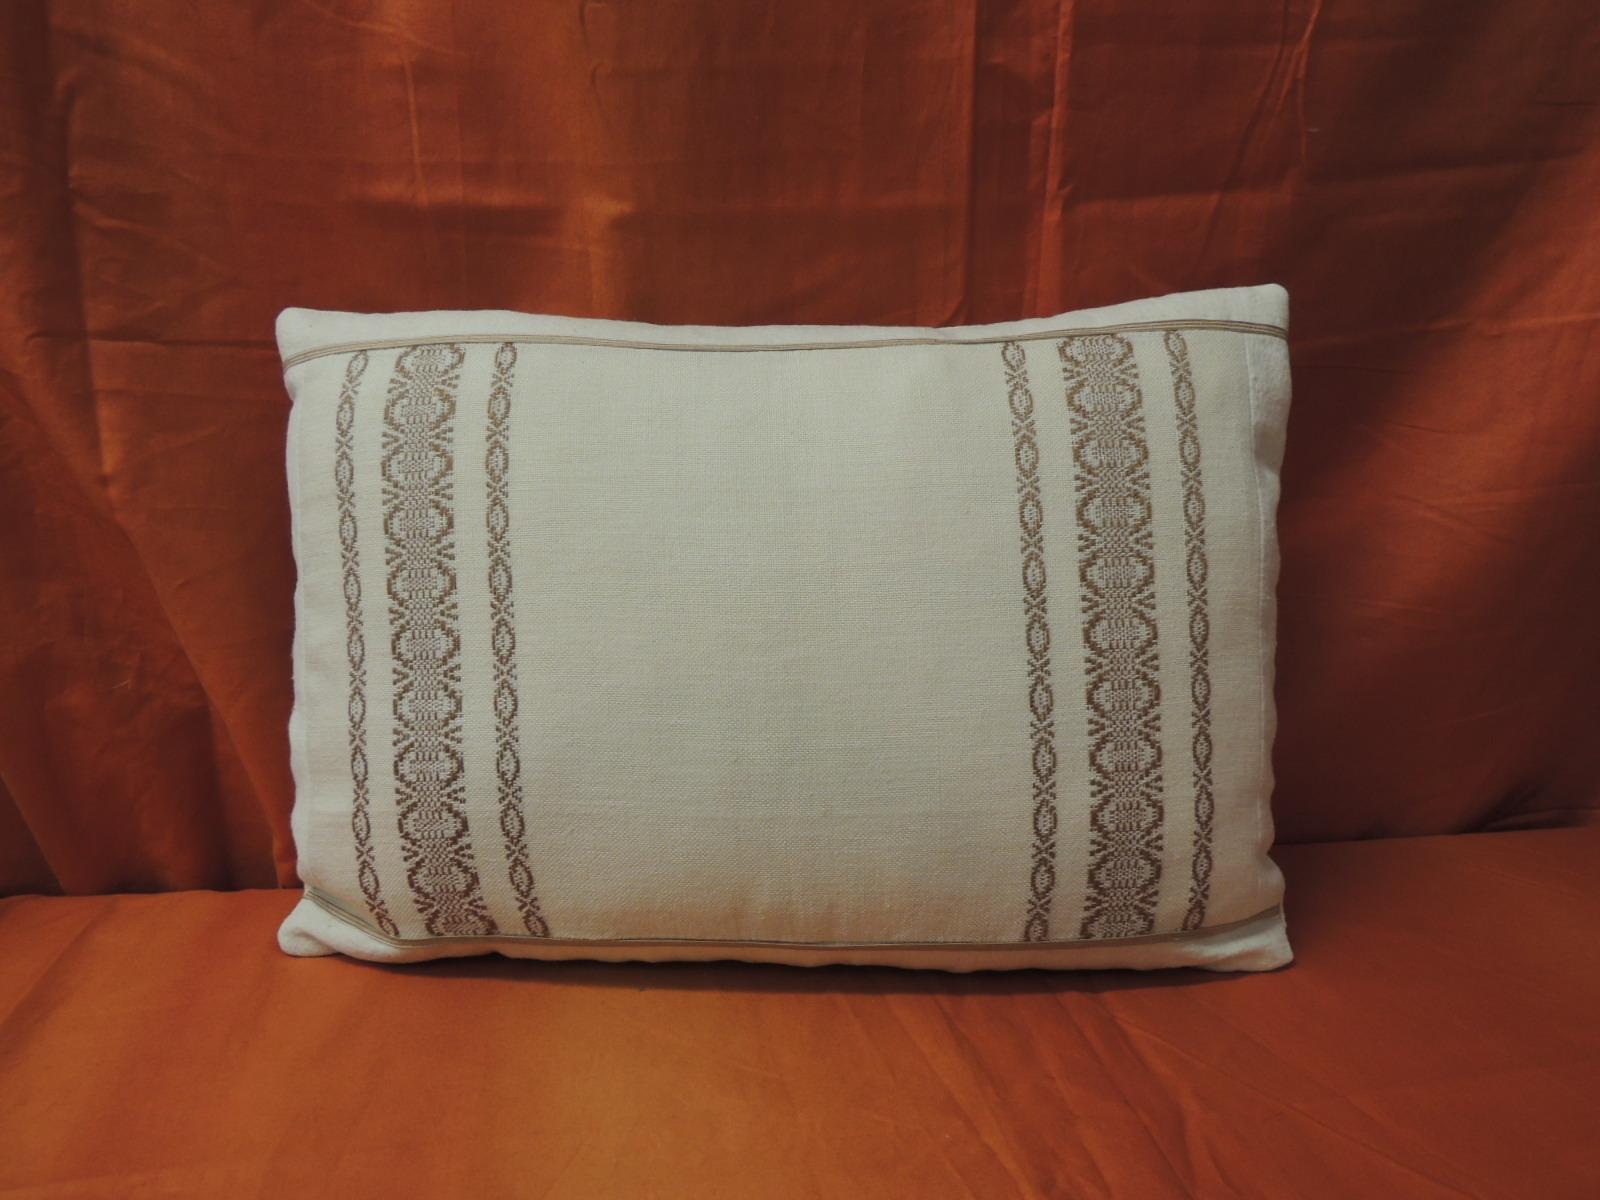 19th century style Petite Greek isle embroidery decorative lumbar pillow with silk embellished flat trim at the seams, 
framed and backed with natural homespun linen. In shades of tan, natural, brown. 
Handcrafted and designed in the USA with a